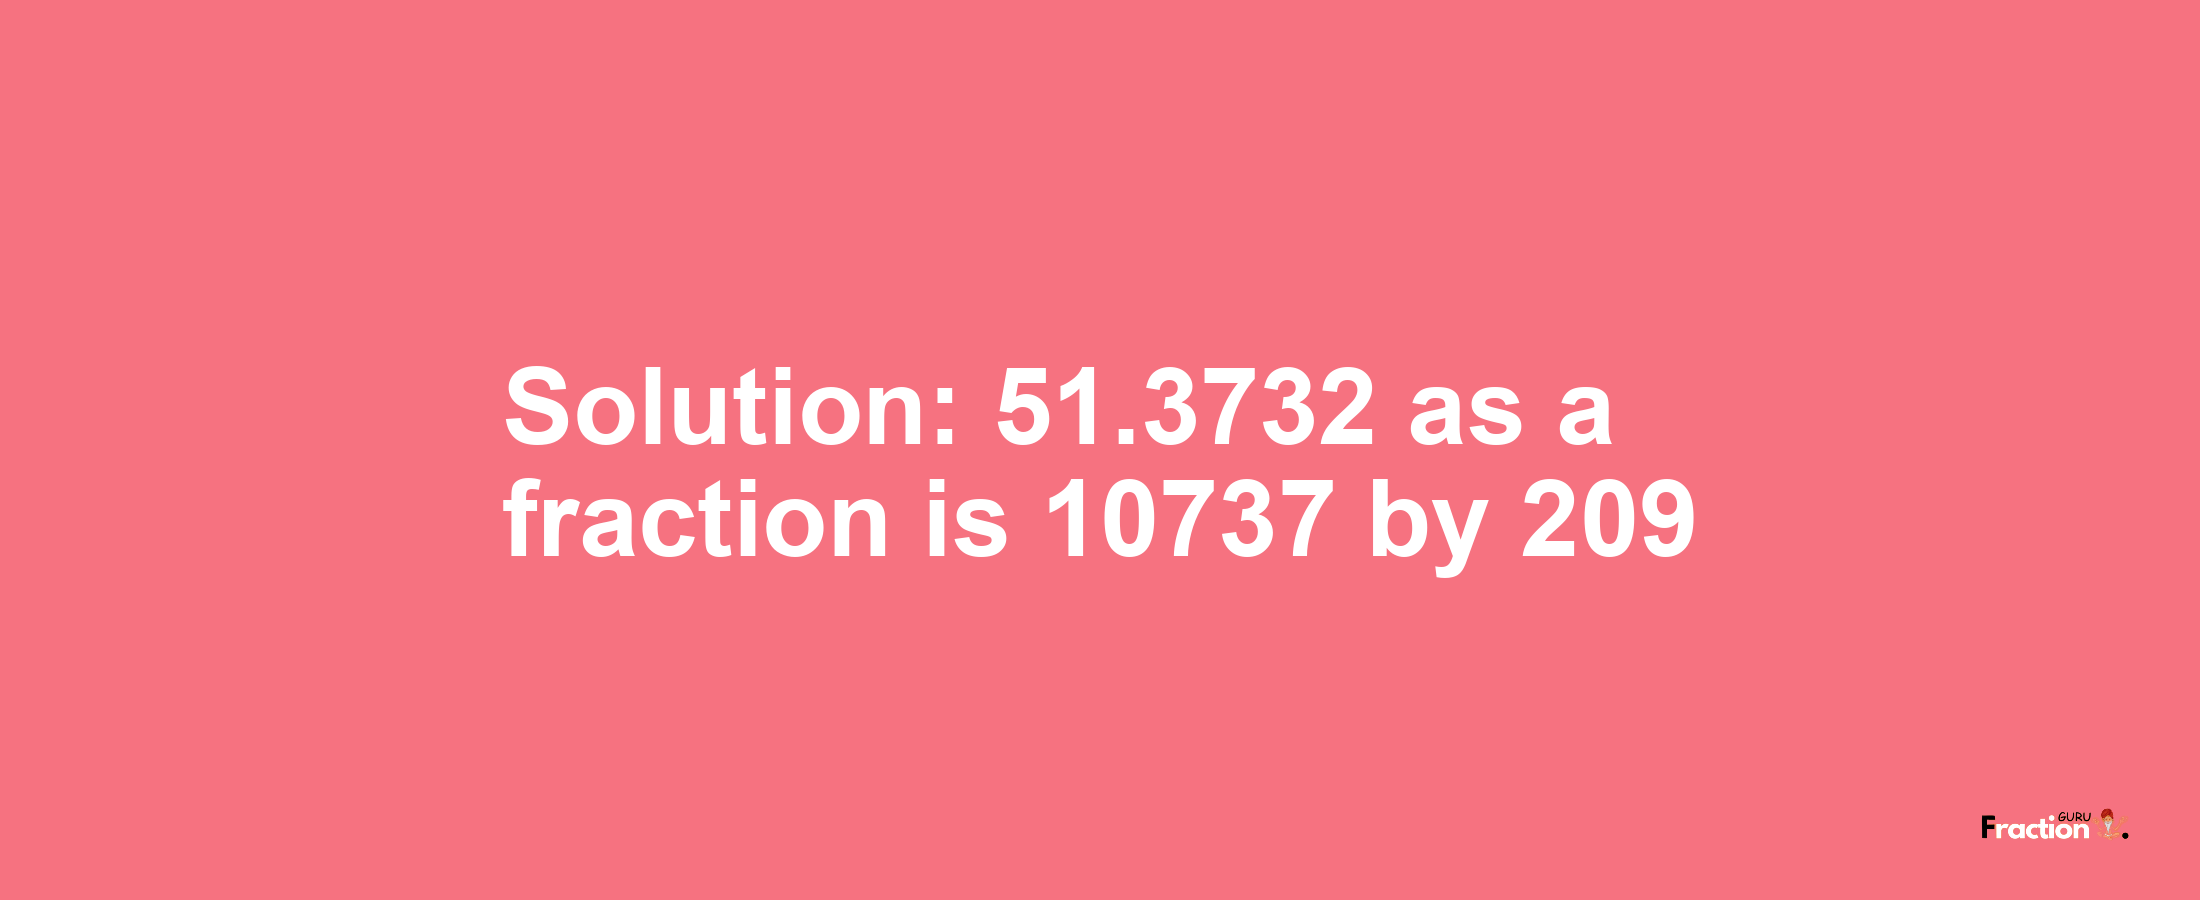 Solution:51.3732 as a fraction is 10737/209